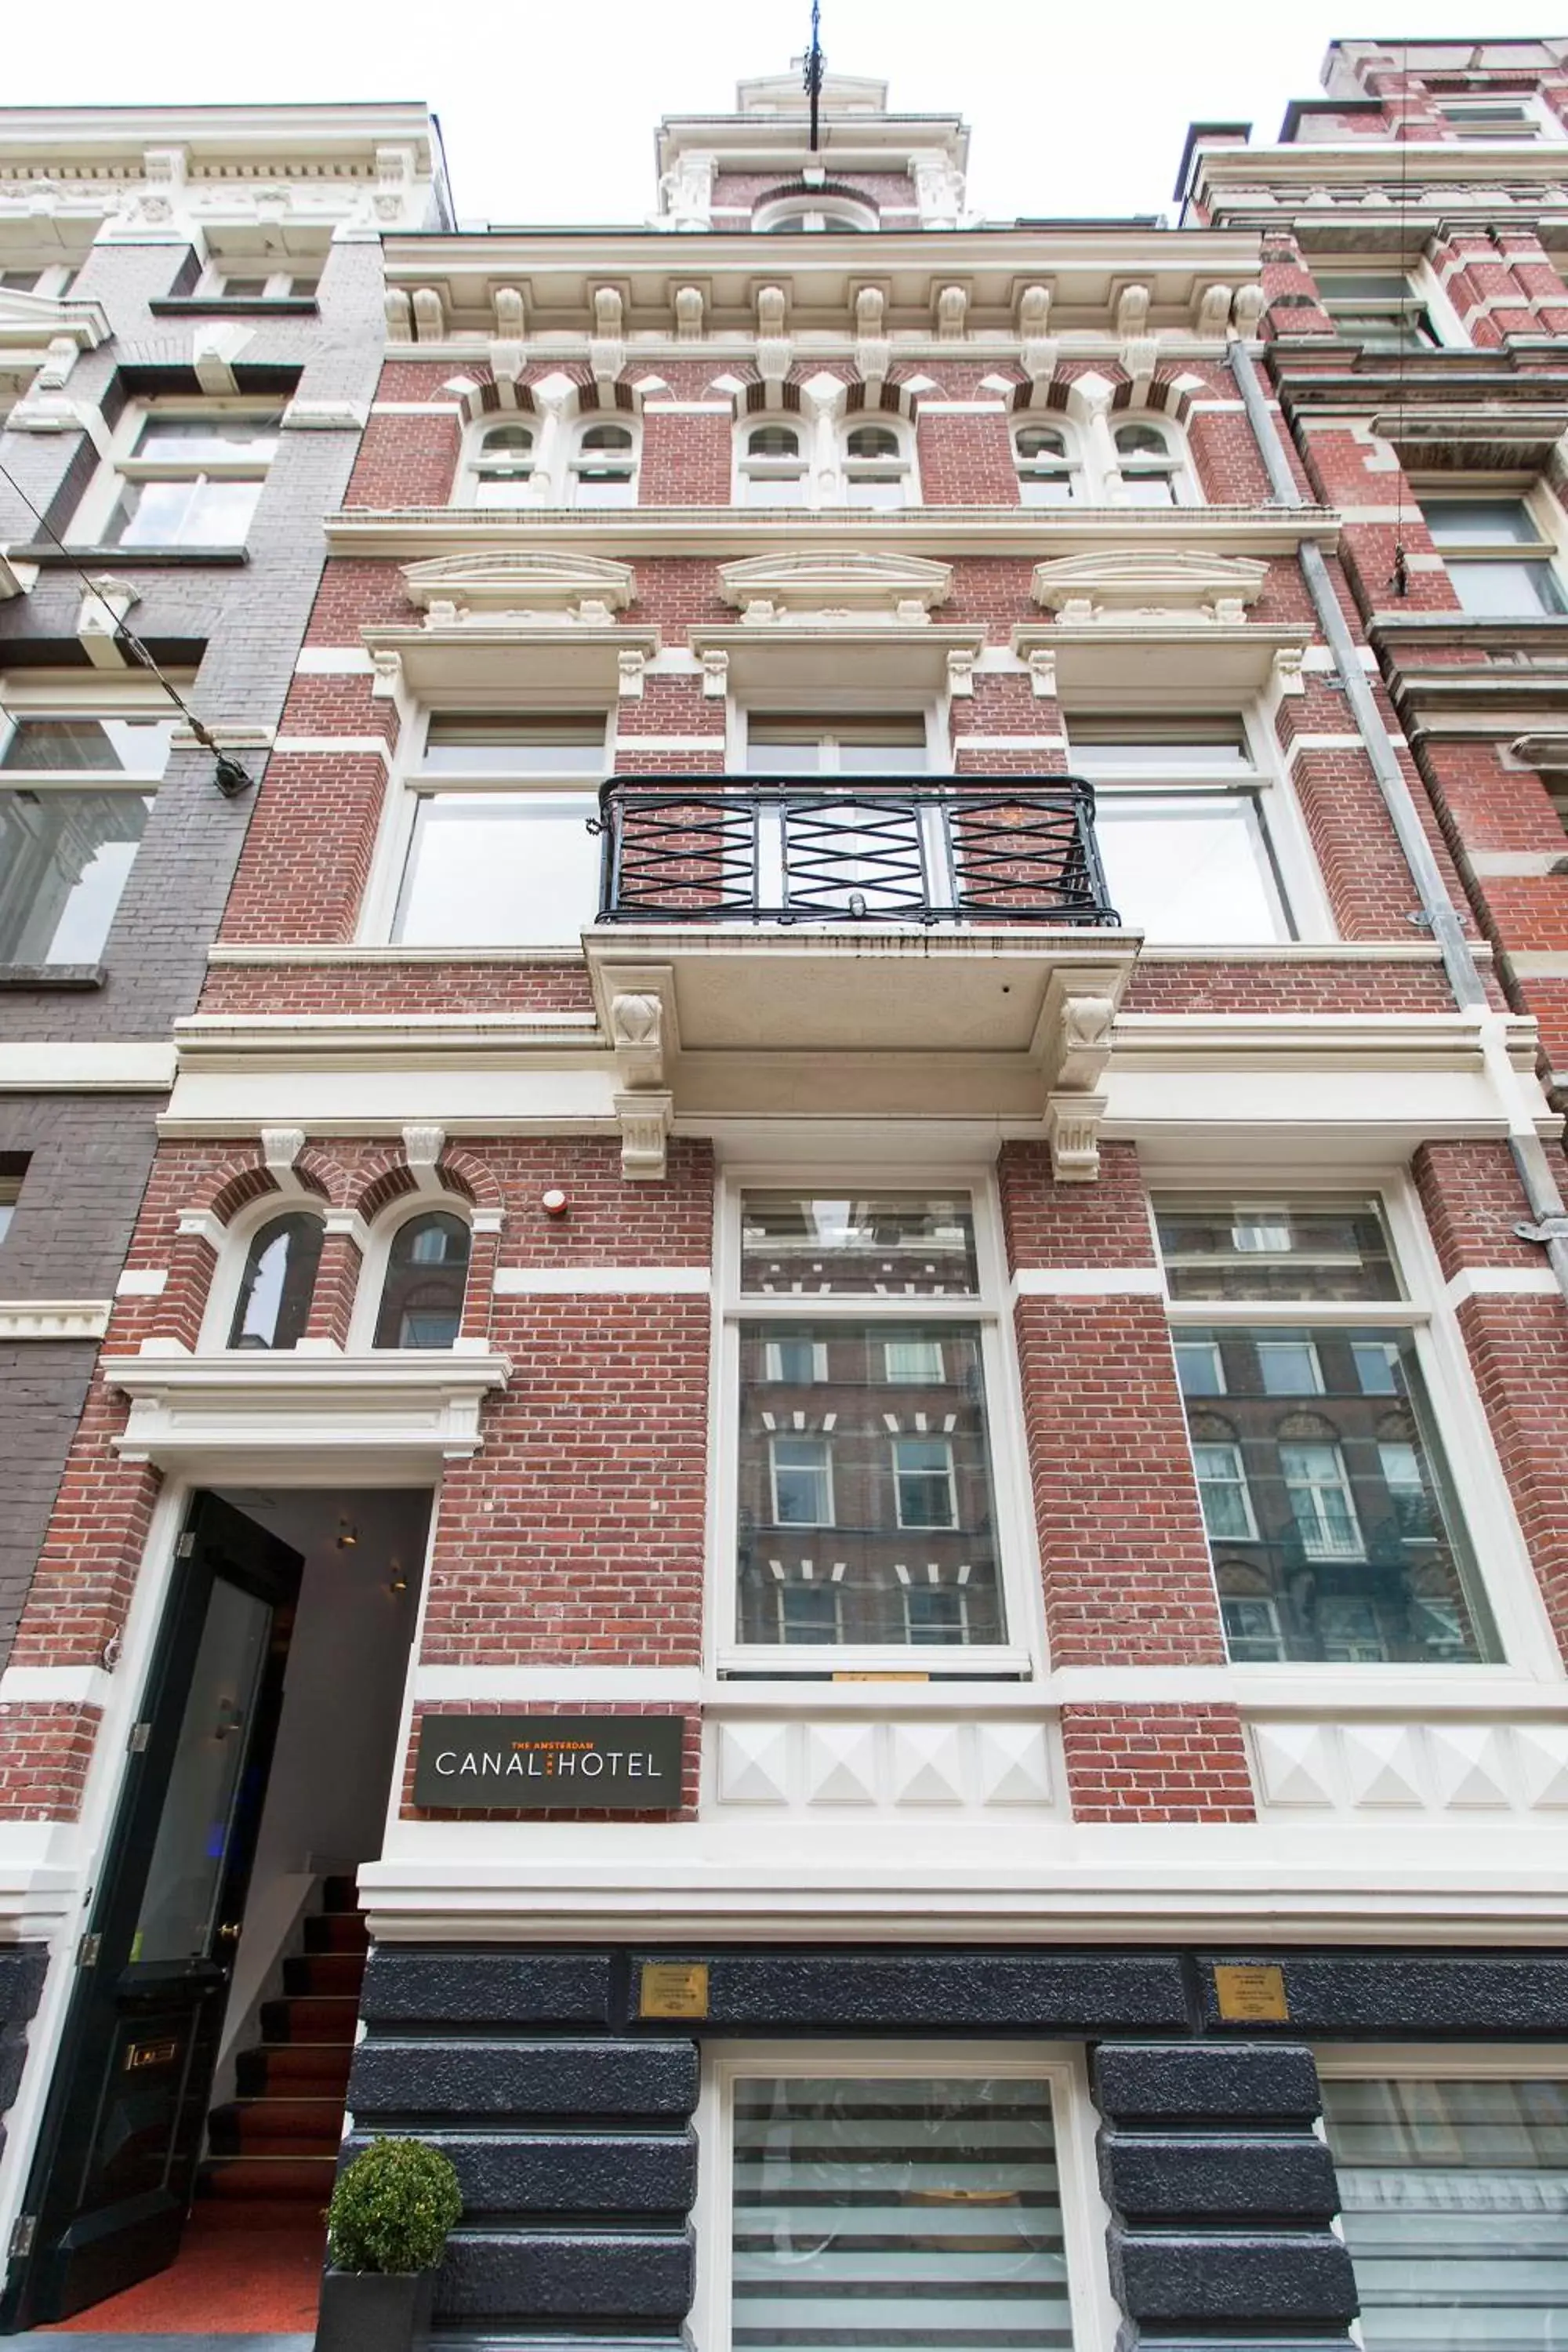 Facade/entrance, Property Building in Amsterdam Canal Hotel